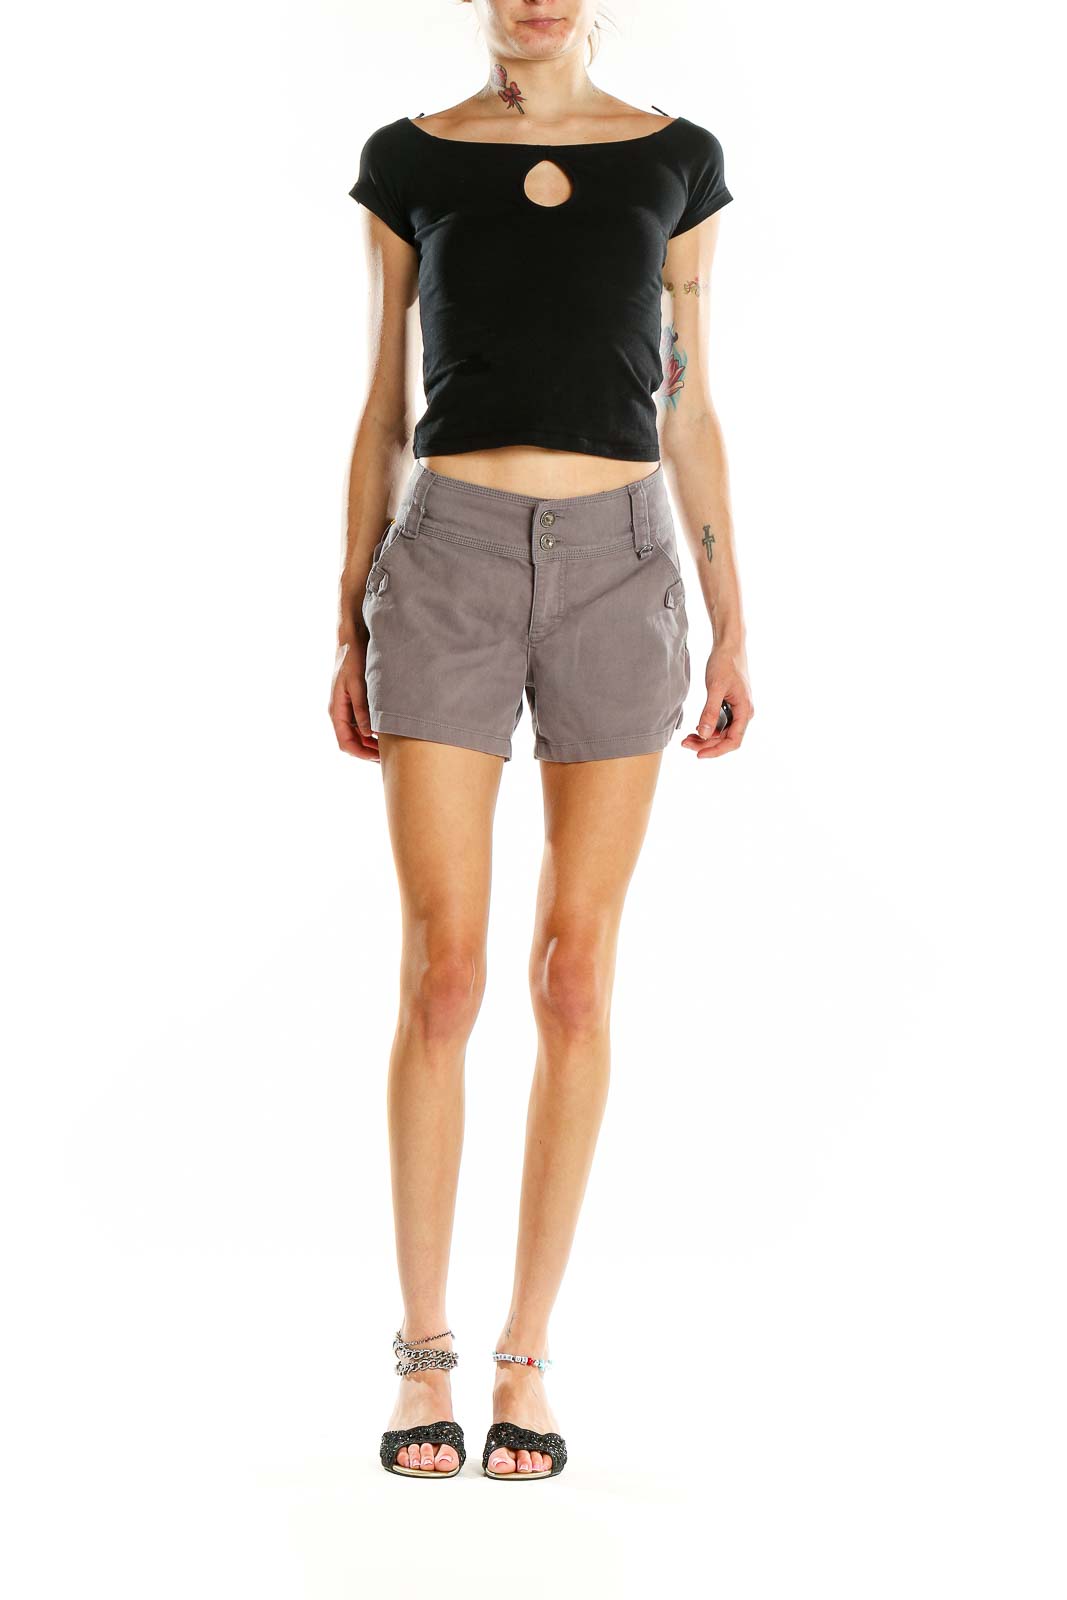 Shop Shorts With Points or Cash | SilkRoll